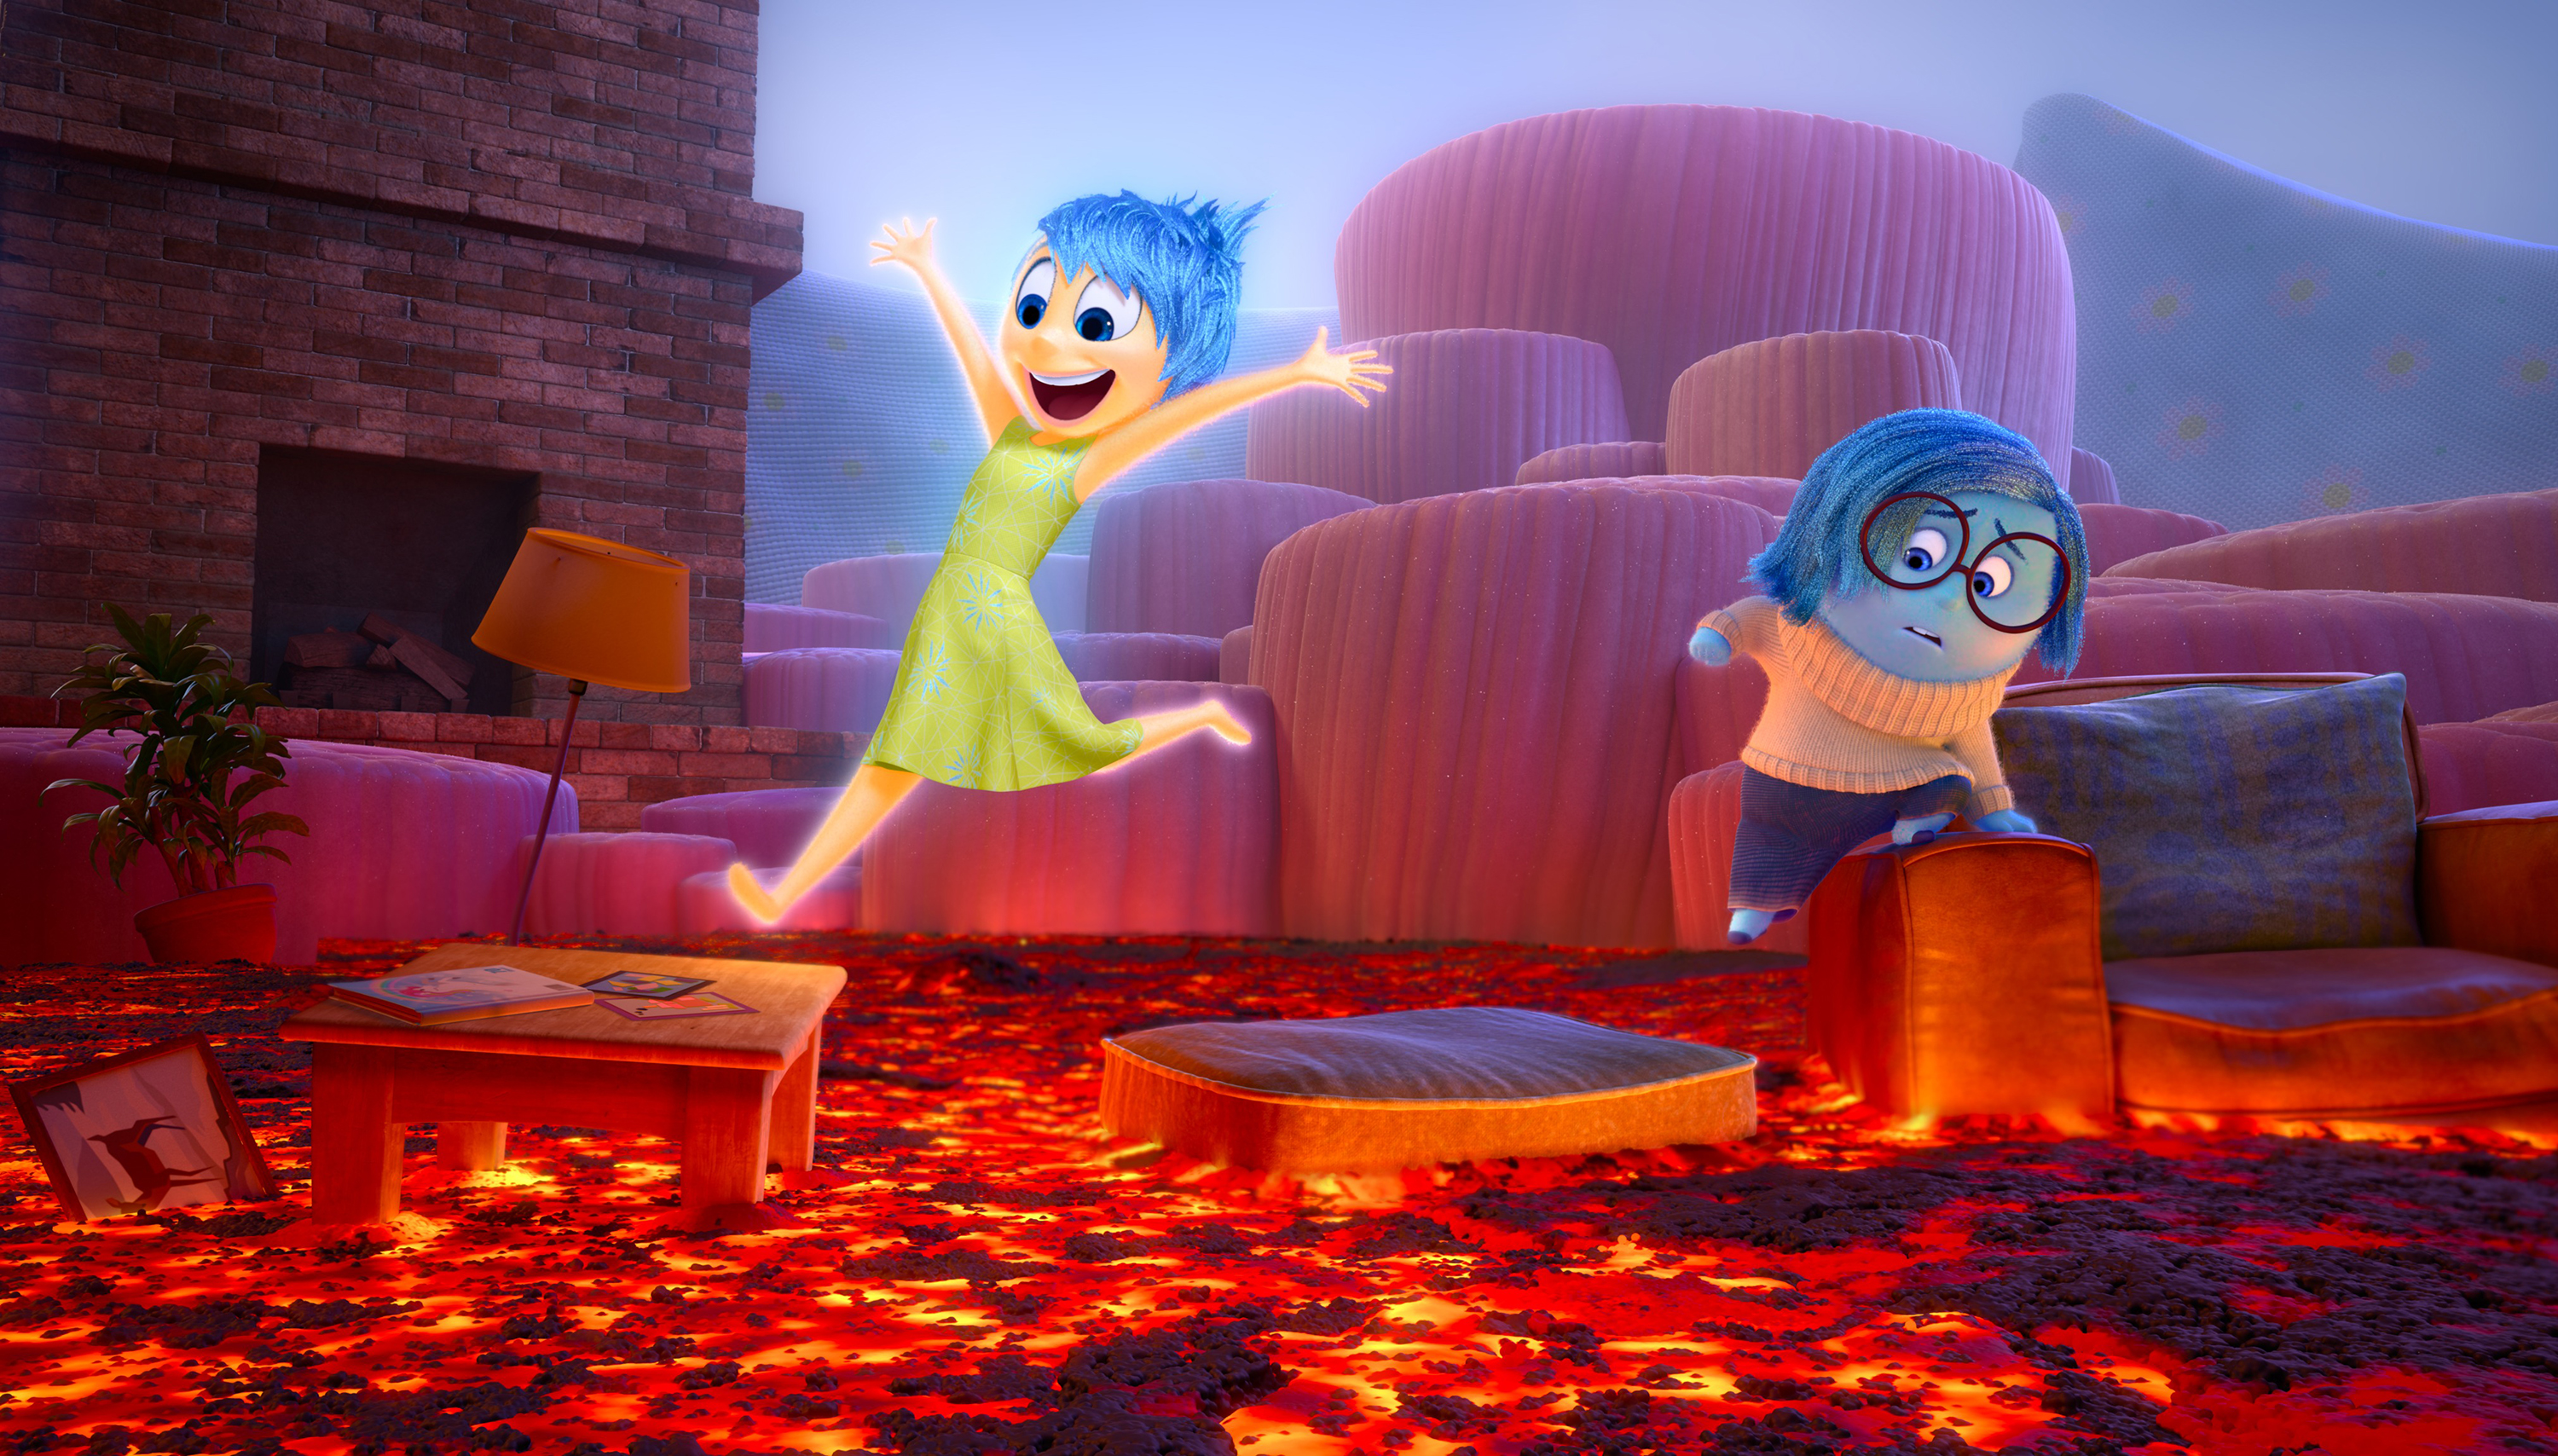 Joy and Sadness represent two of the emotions clashing in a little girl’s mind. (Pixar)